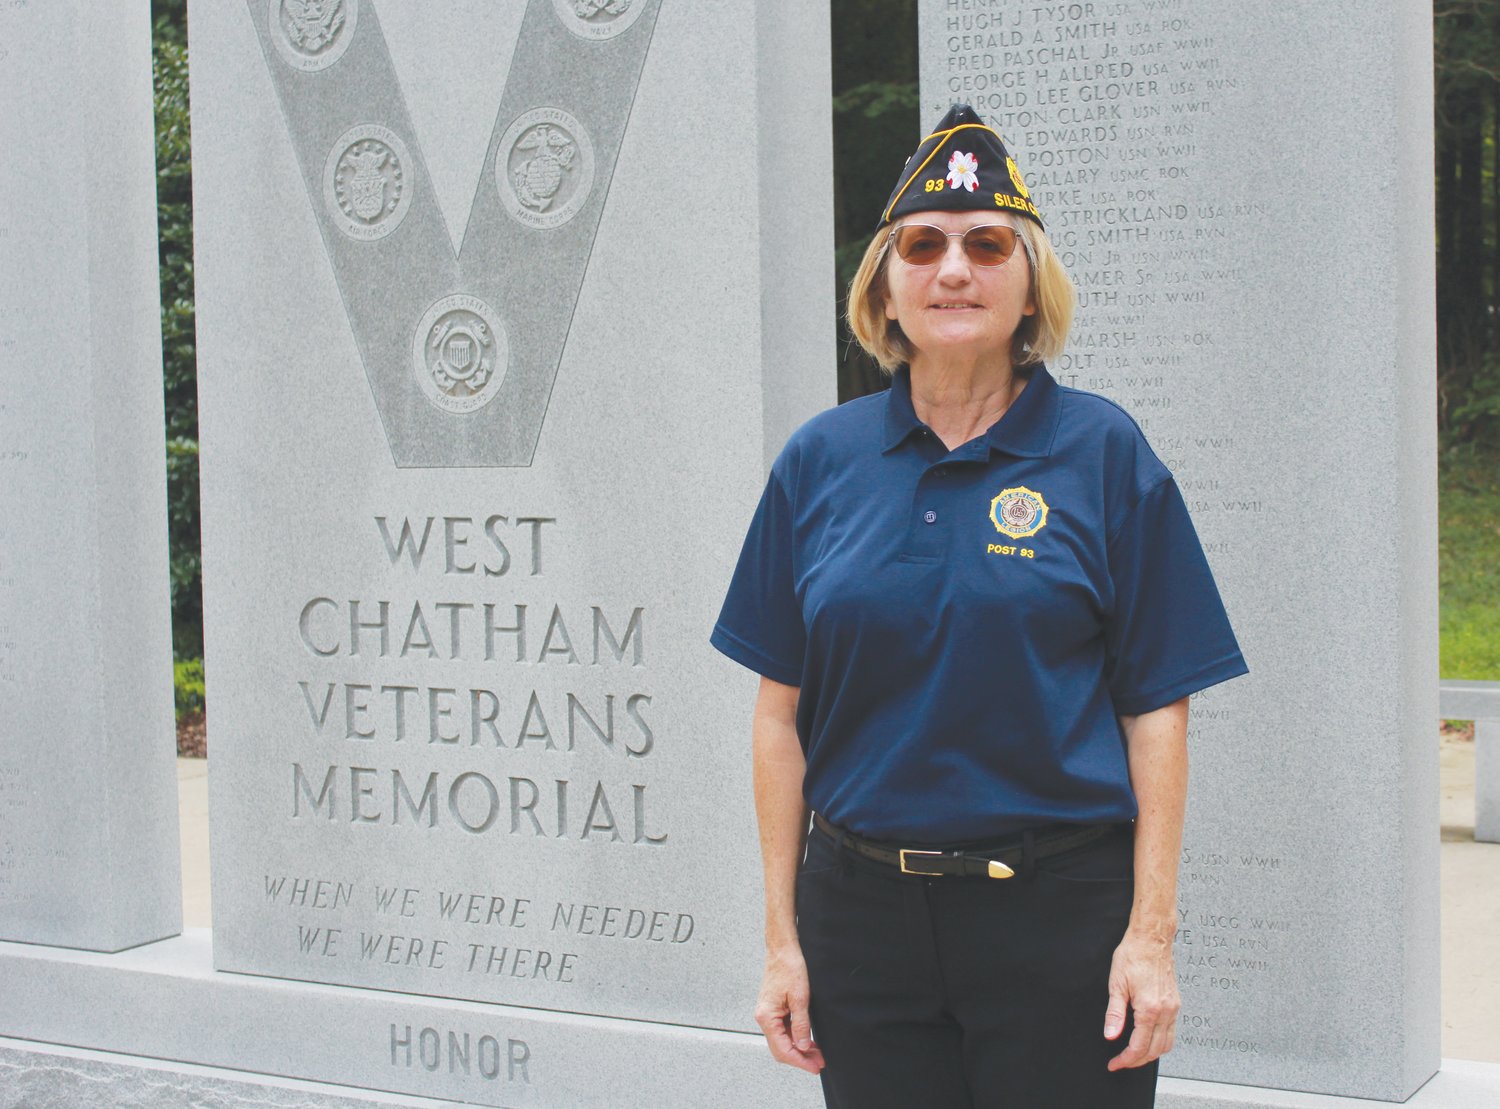 American Legion Post 93 Commander Carin O’Brien poses for a portrait next to the West Chatham Veterans Memorial at Bray Park in Siler City. O’Brien is the first female commander for Post 93. This year, Post 93 will be celebrating its 100th anniversary as an organization for veterans.